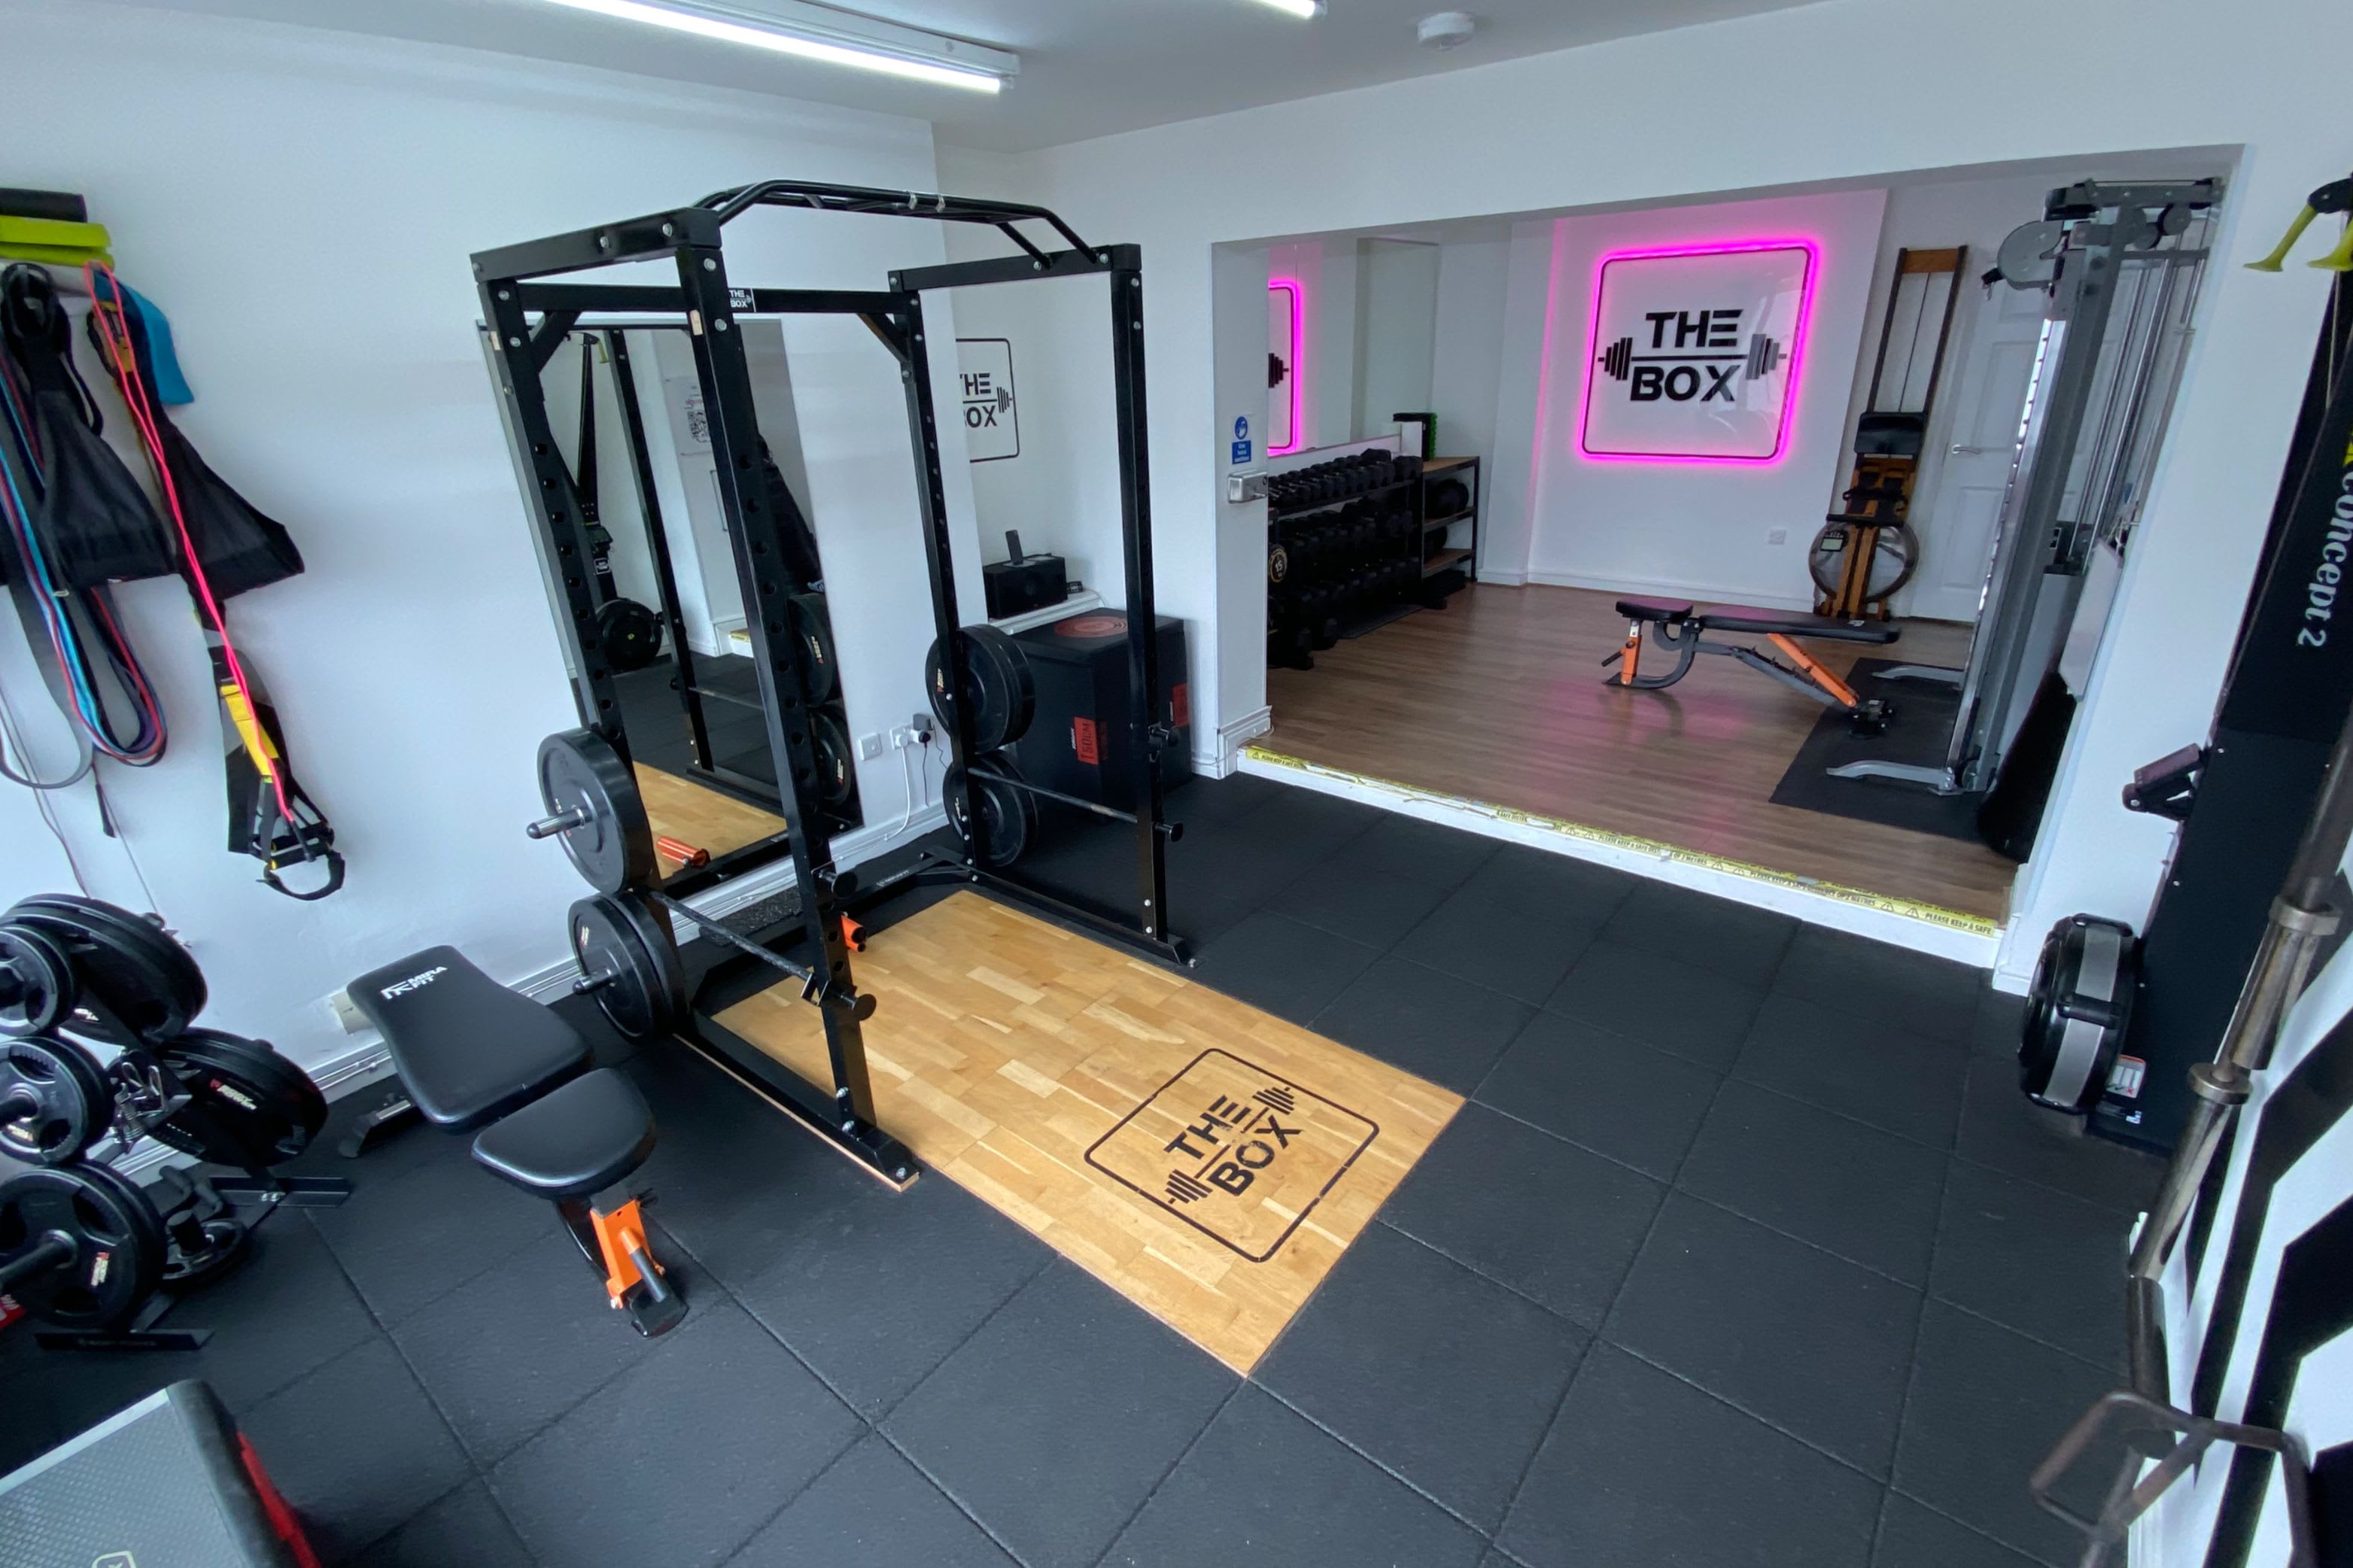 THE CORPORAL - Complete Box Gym Equipment Package